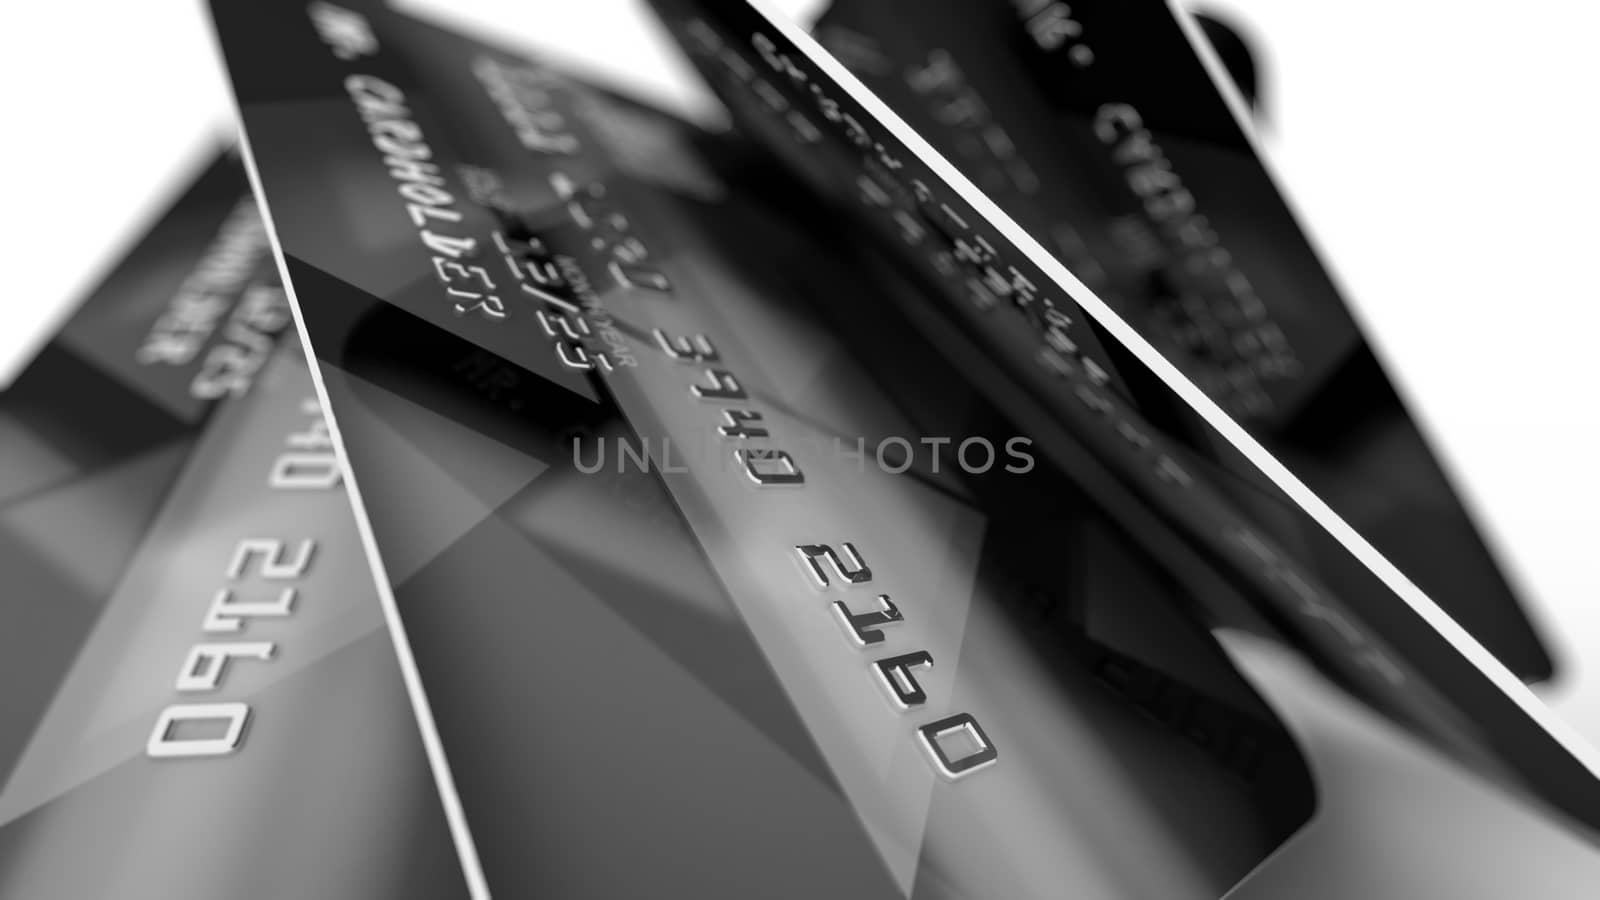 Inspiring 3d illustration of modern credit cards with lines of digits presented aslant in a black and grey palette in the white background.